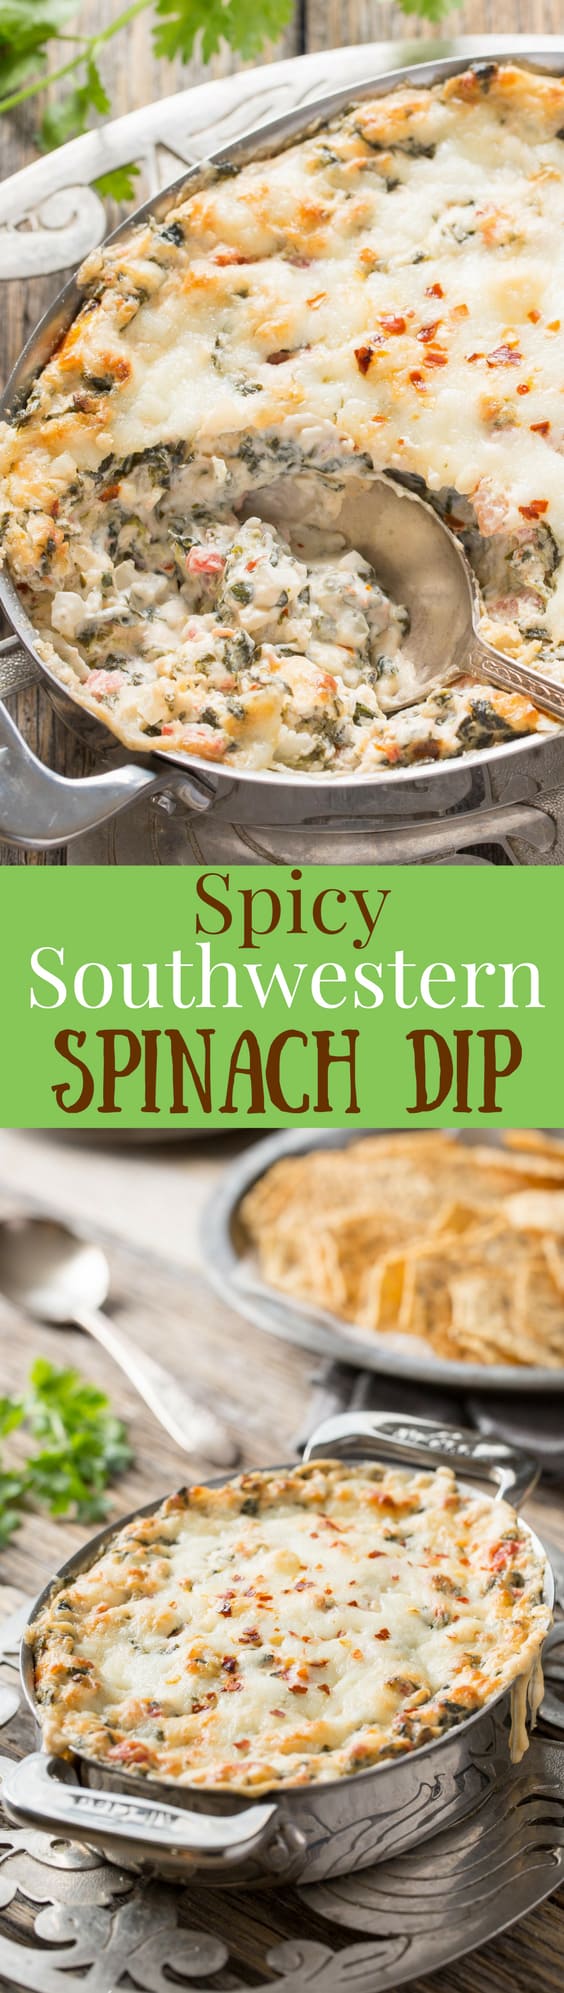 Spicy Southwestern Spinach Dip - a spicy warm spinach dip packed with flavor. Serve with bread, chips or crackers. Easily mixed up ahead of time then baked when ready to serve. www.savingdessert.com